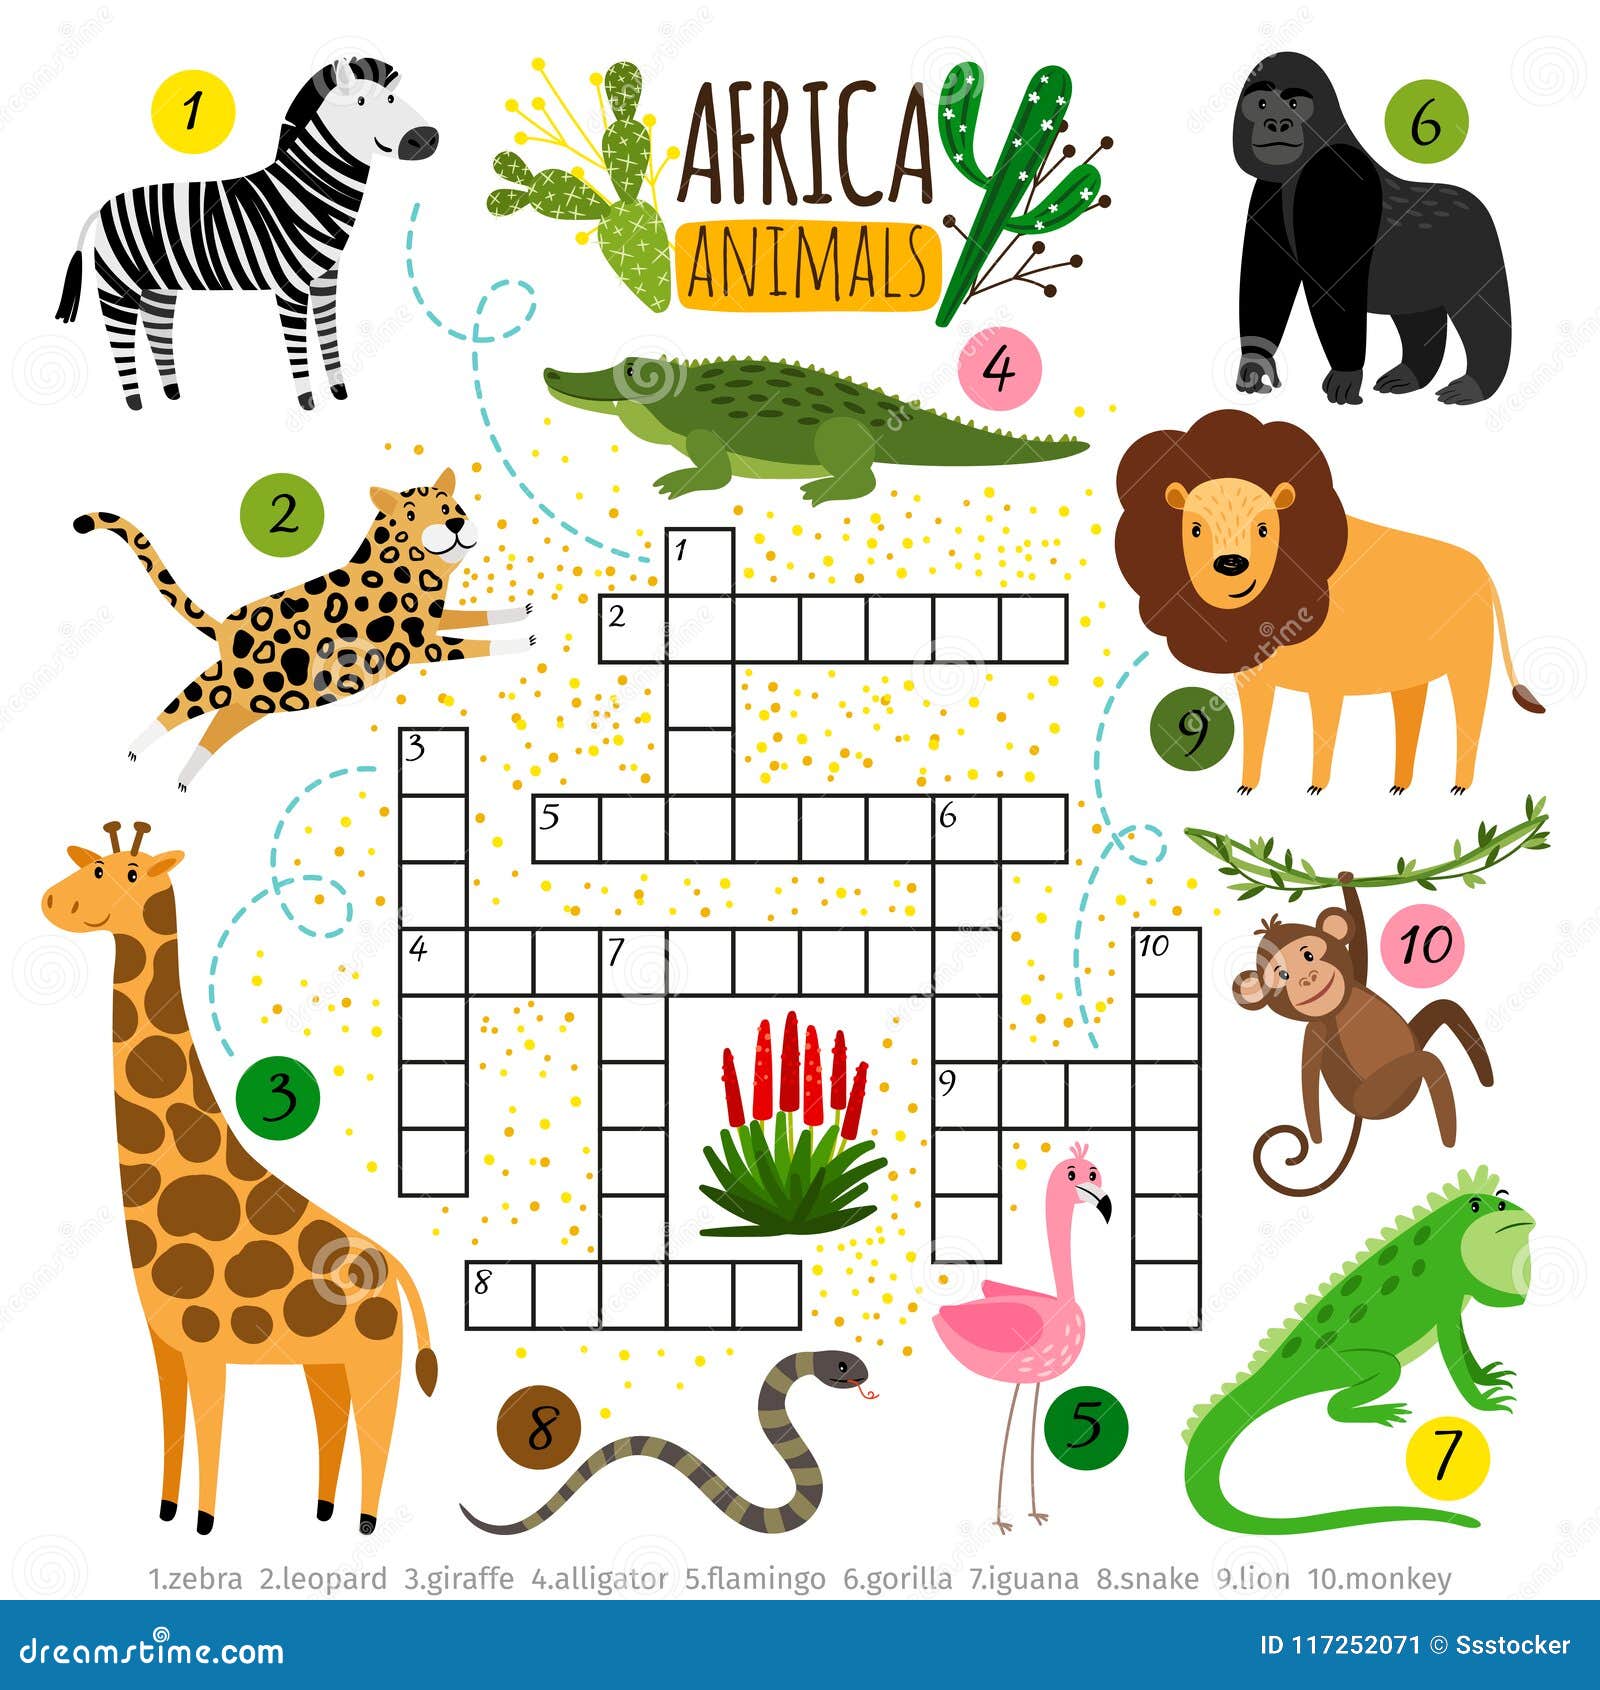 Crossword Africa Animals. Kids Zoo African Crossword for School Children,  Words Searching Game Stock Vector - Illustration of animals, isolated:  117252071